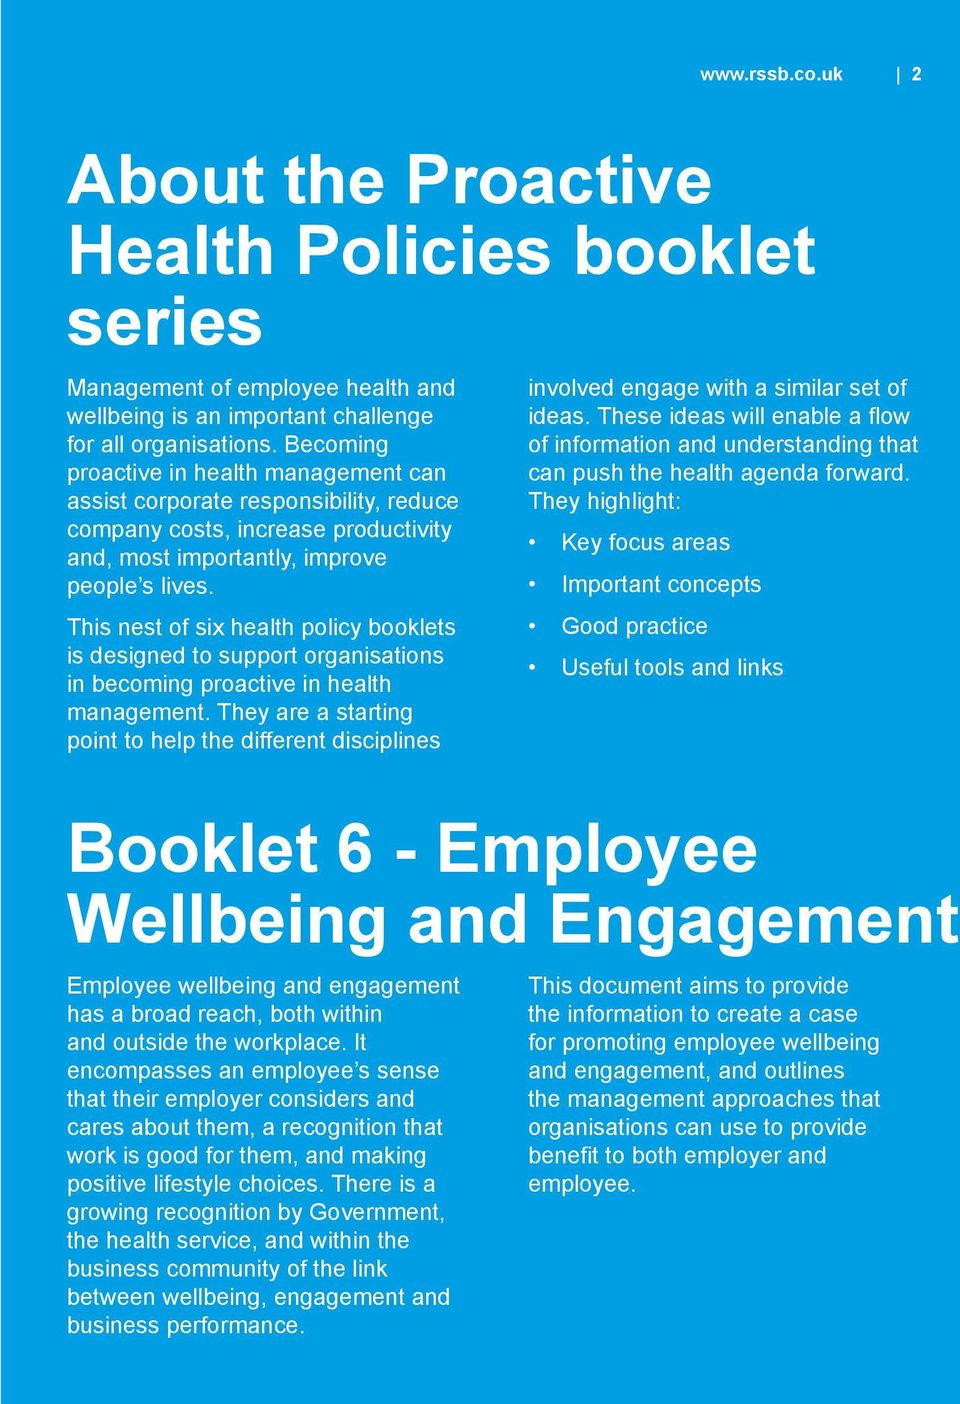 This nest of six health policy booklets is designed to support organisations in becoming proactive in health management.